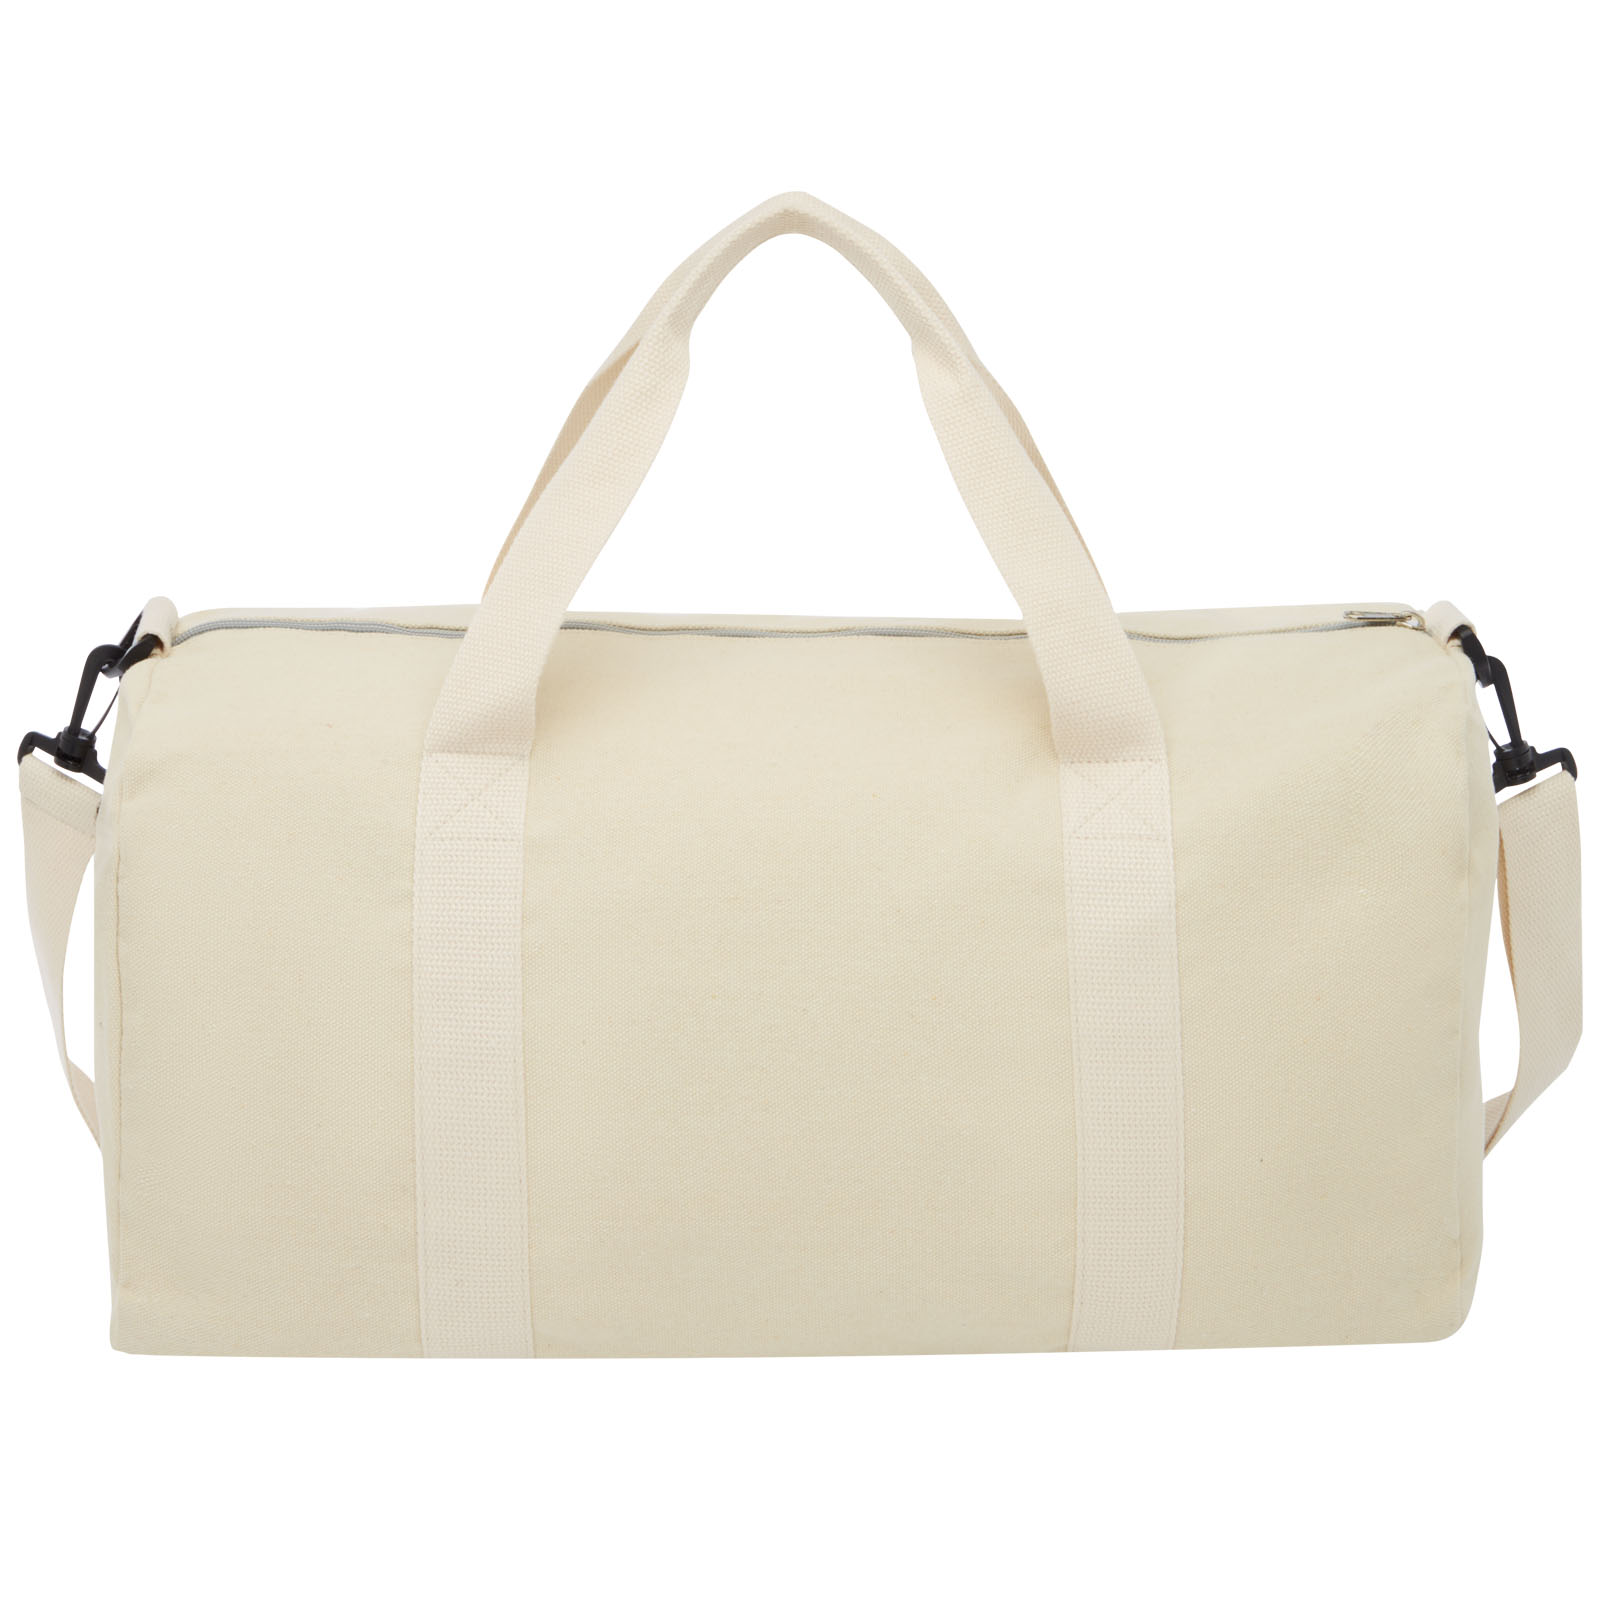 Advertising Sailor Bags - Pheebs 450 g/m² recycled cotton and polyester duffel bag 24L - 1